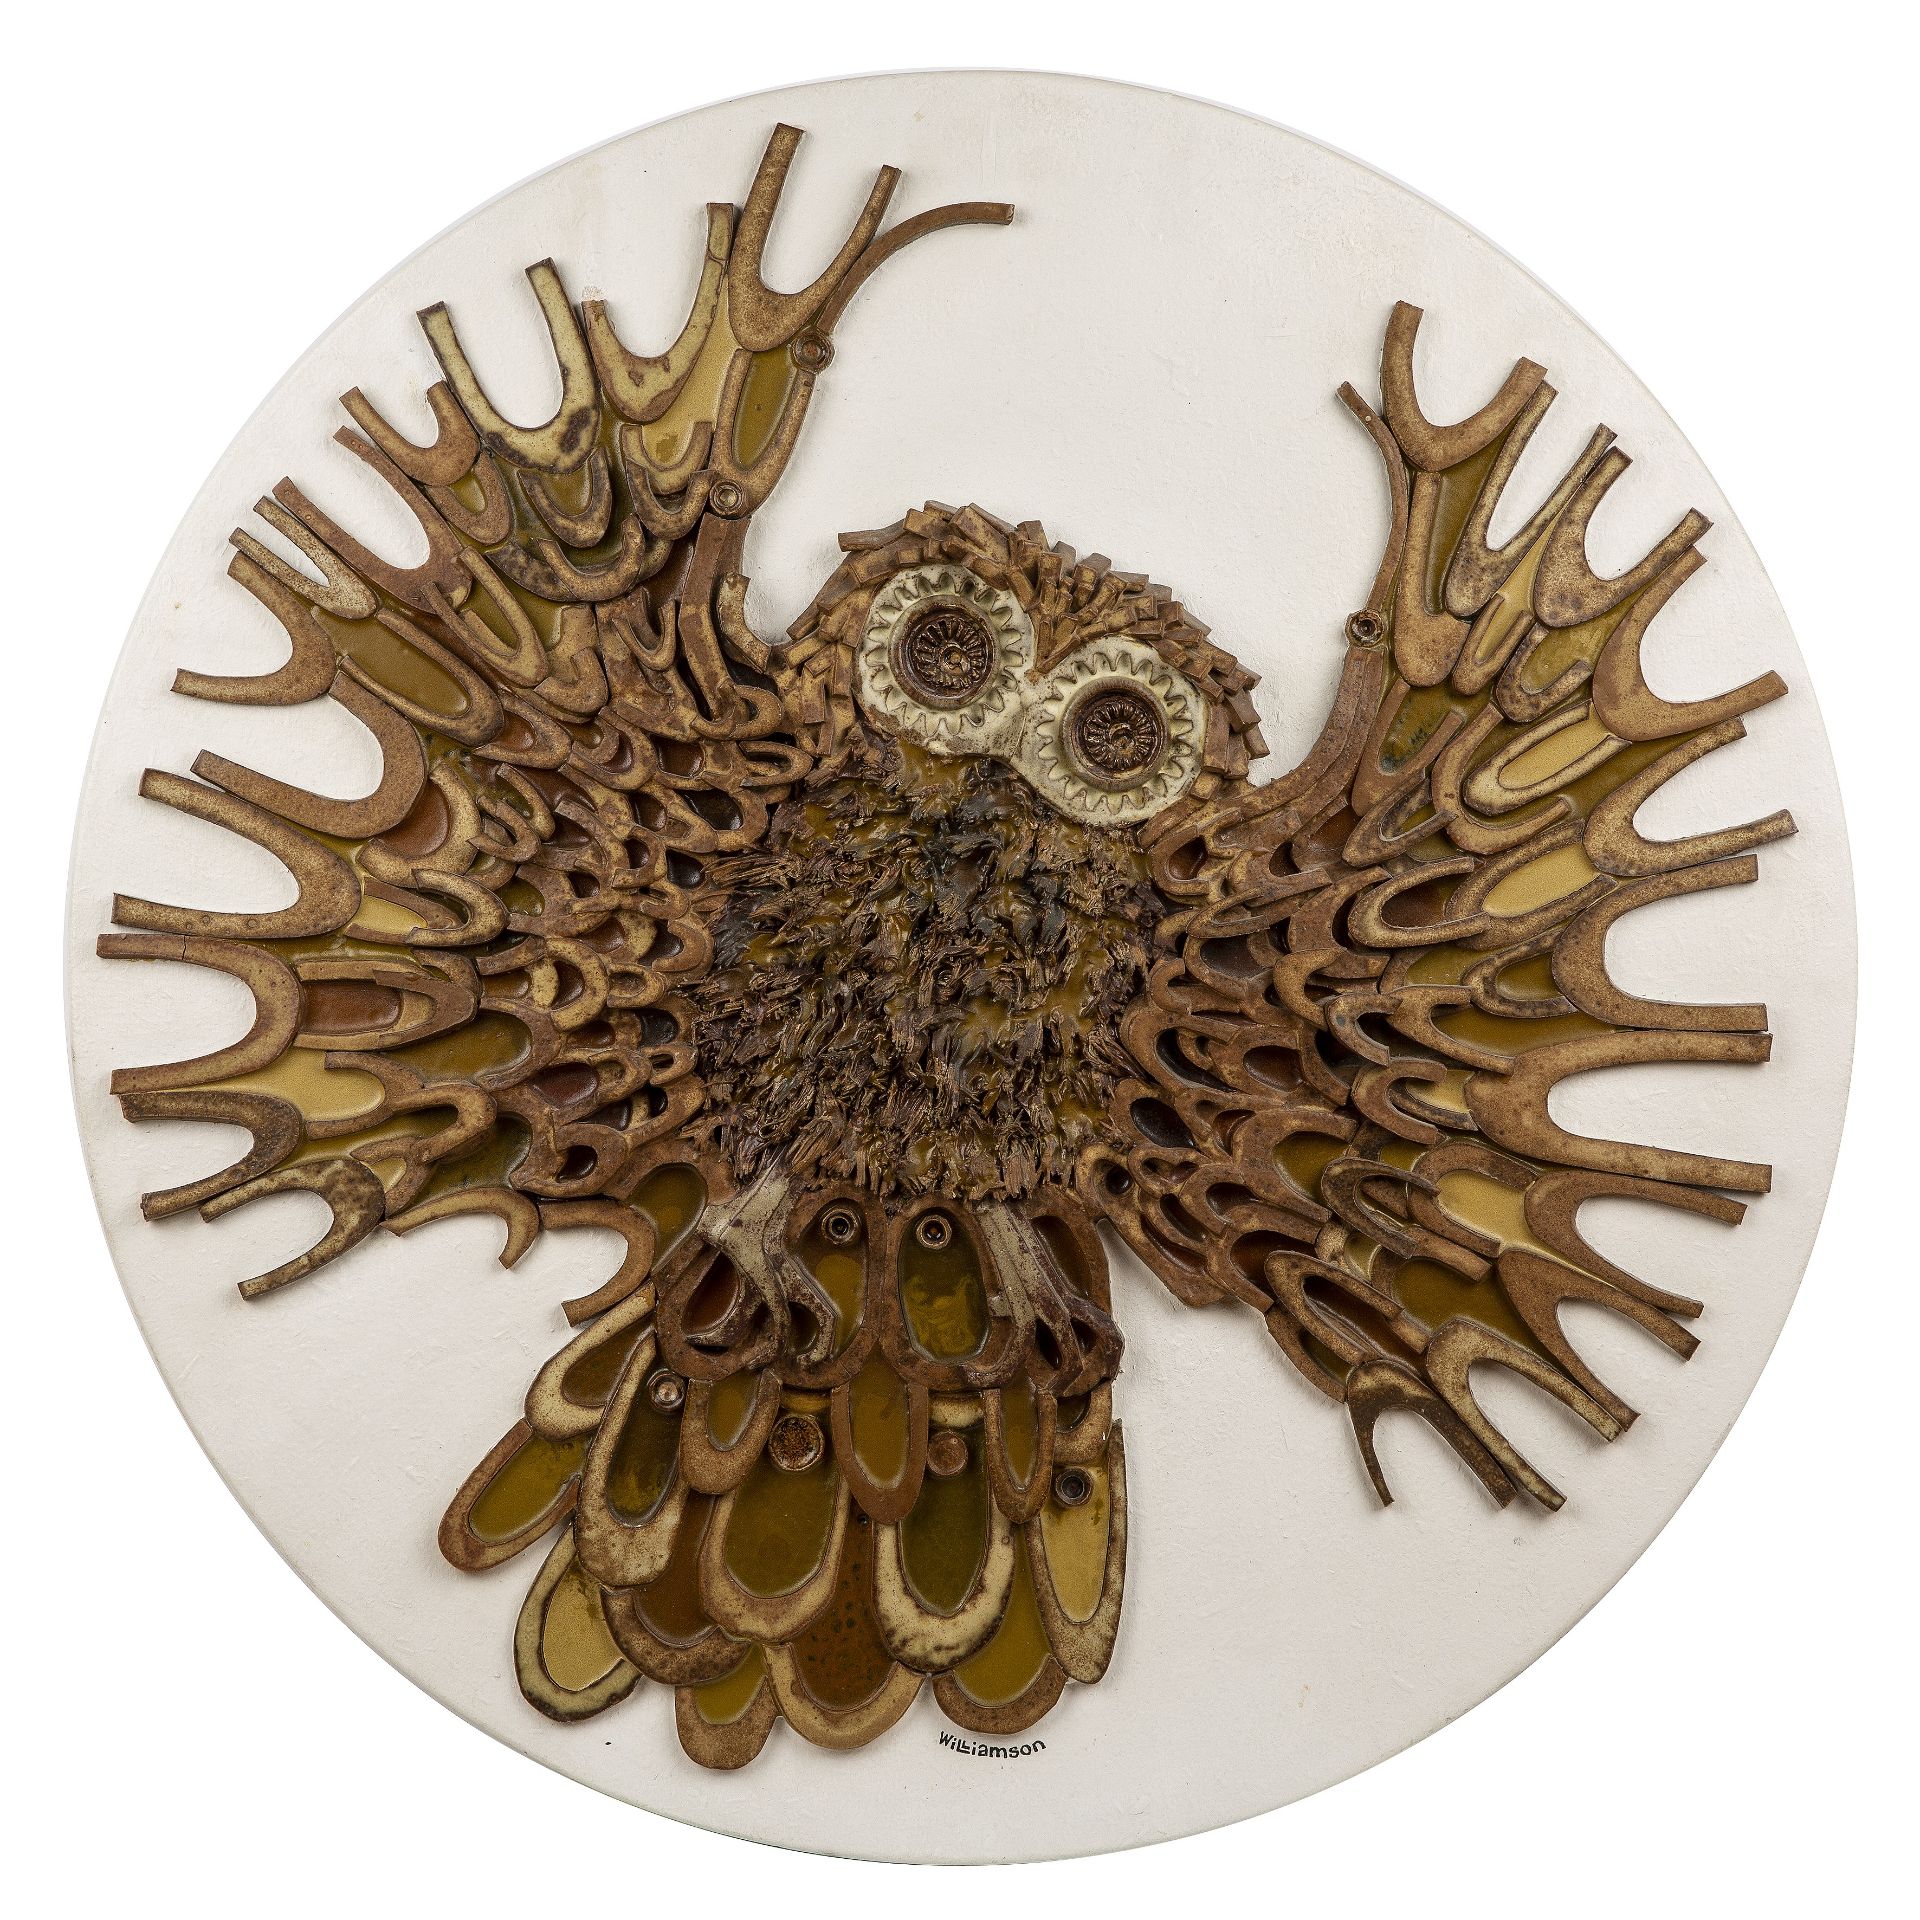 Williamson (20th Century School) 'Owl roundel' pottery plaque, signed to the edge of the piece, 75cm